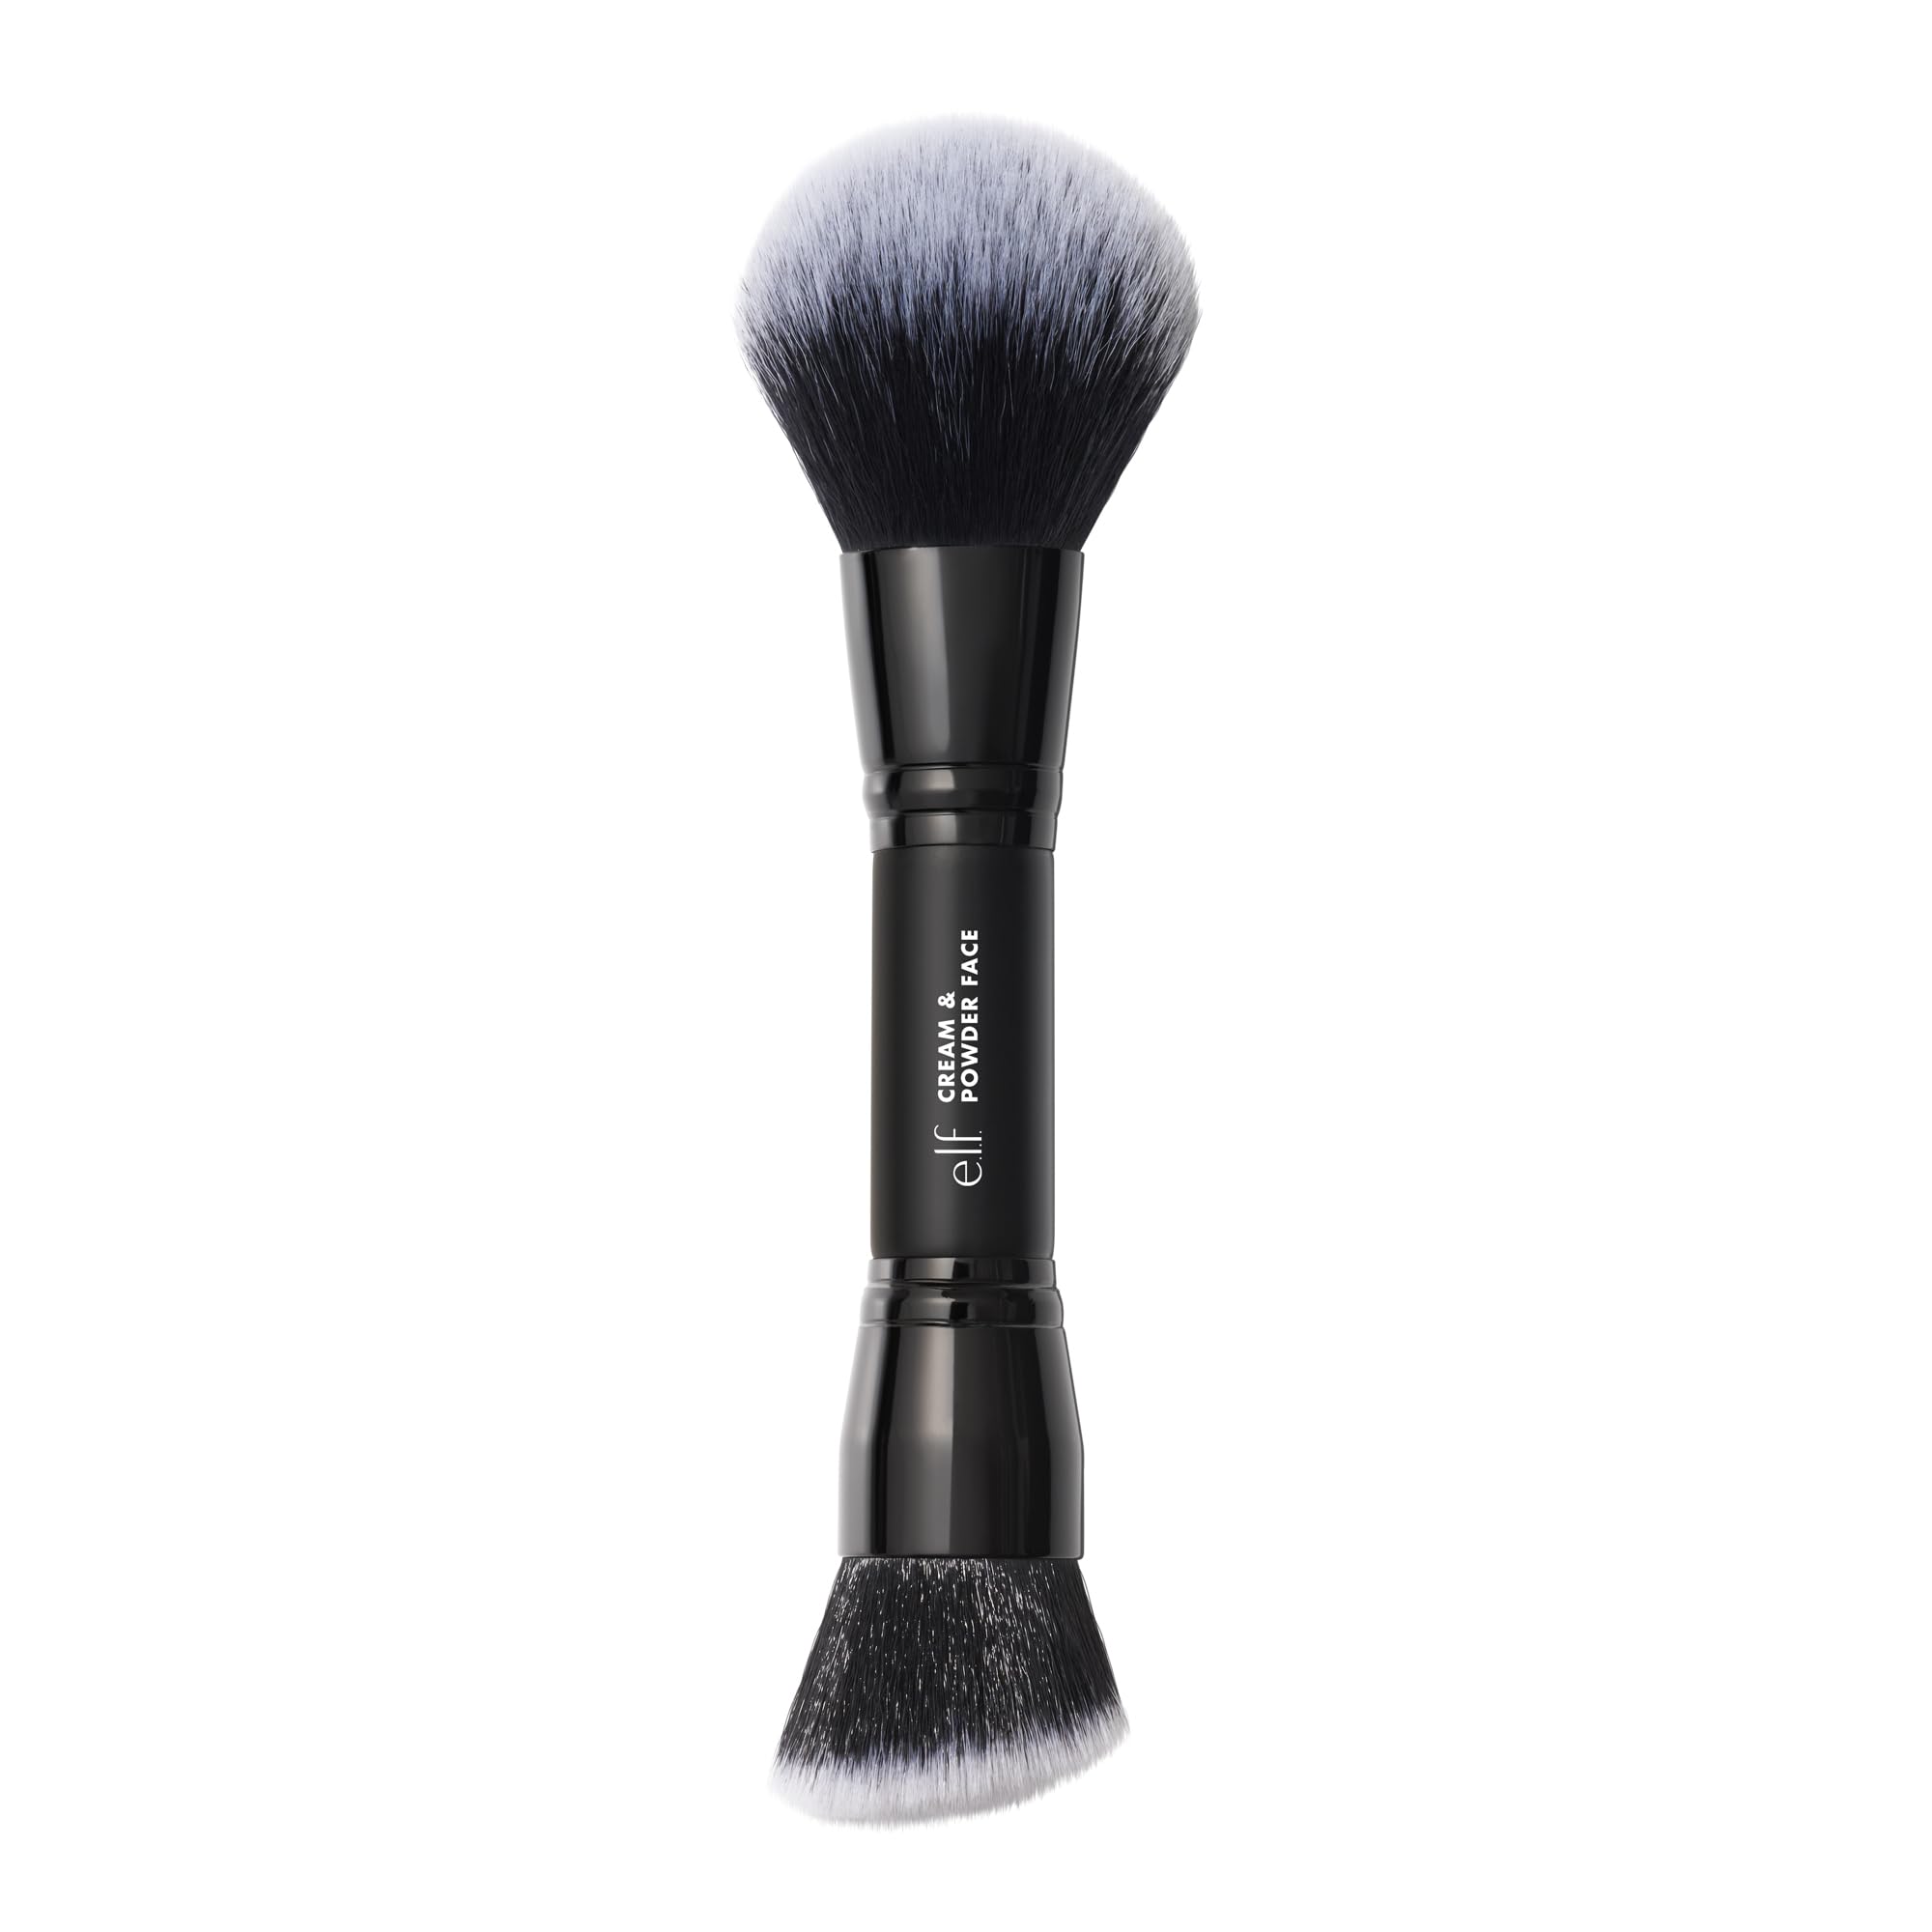 e.l.f. Dual-Ended Cream + Powder Brush, Two-in-One Makeup Brush For Creating A Gorgeous, Airbrushed-looking Complexion, Vegan & Cruelty-free